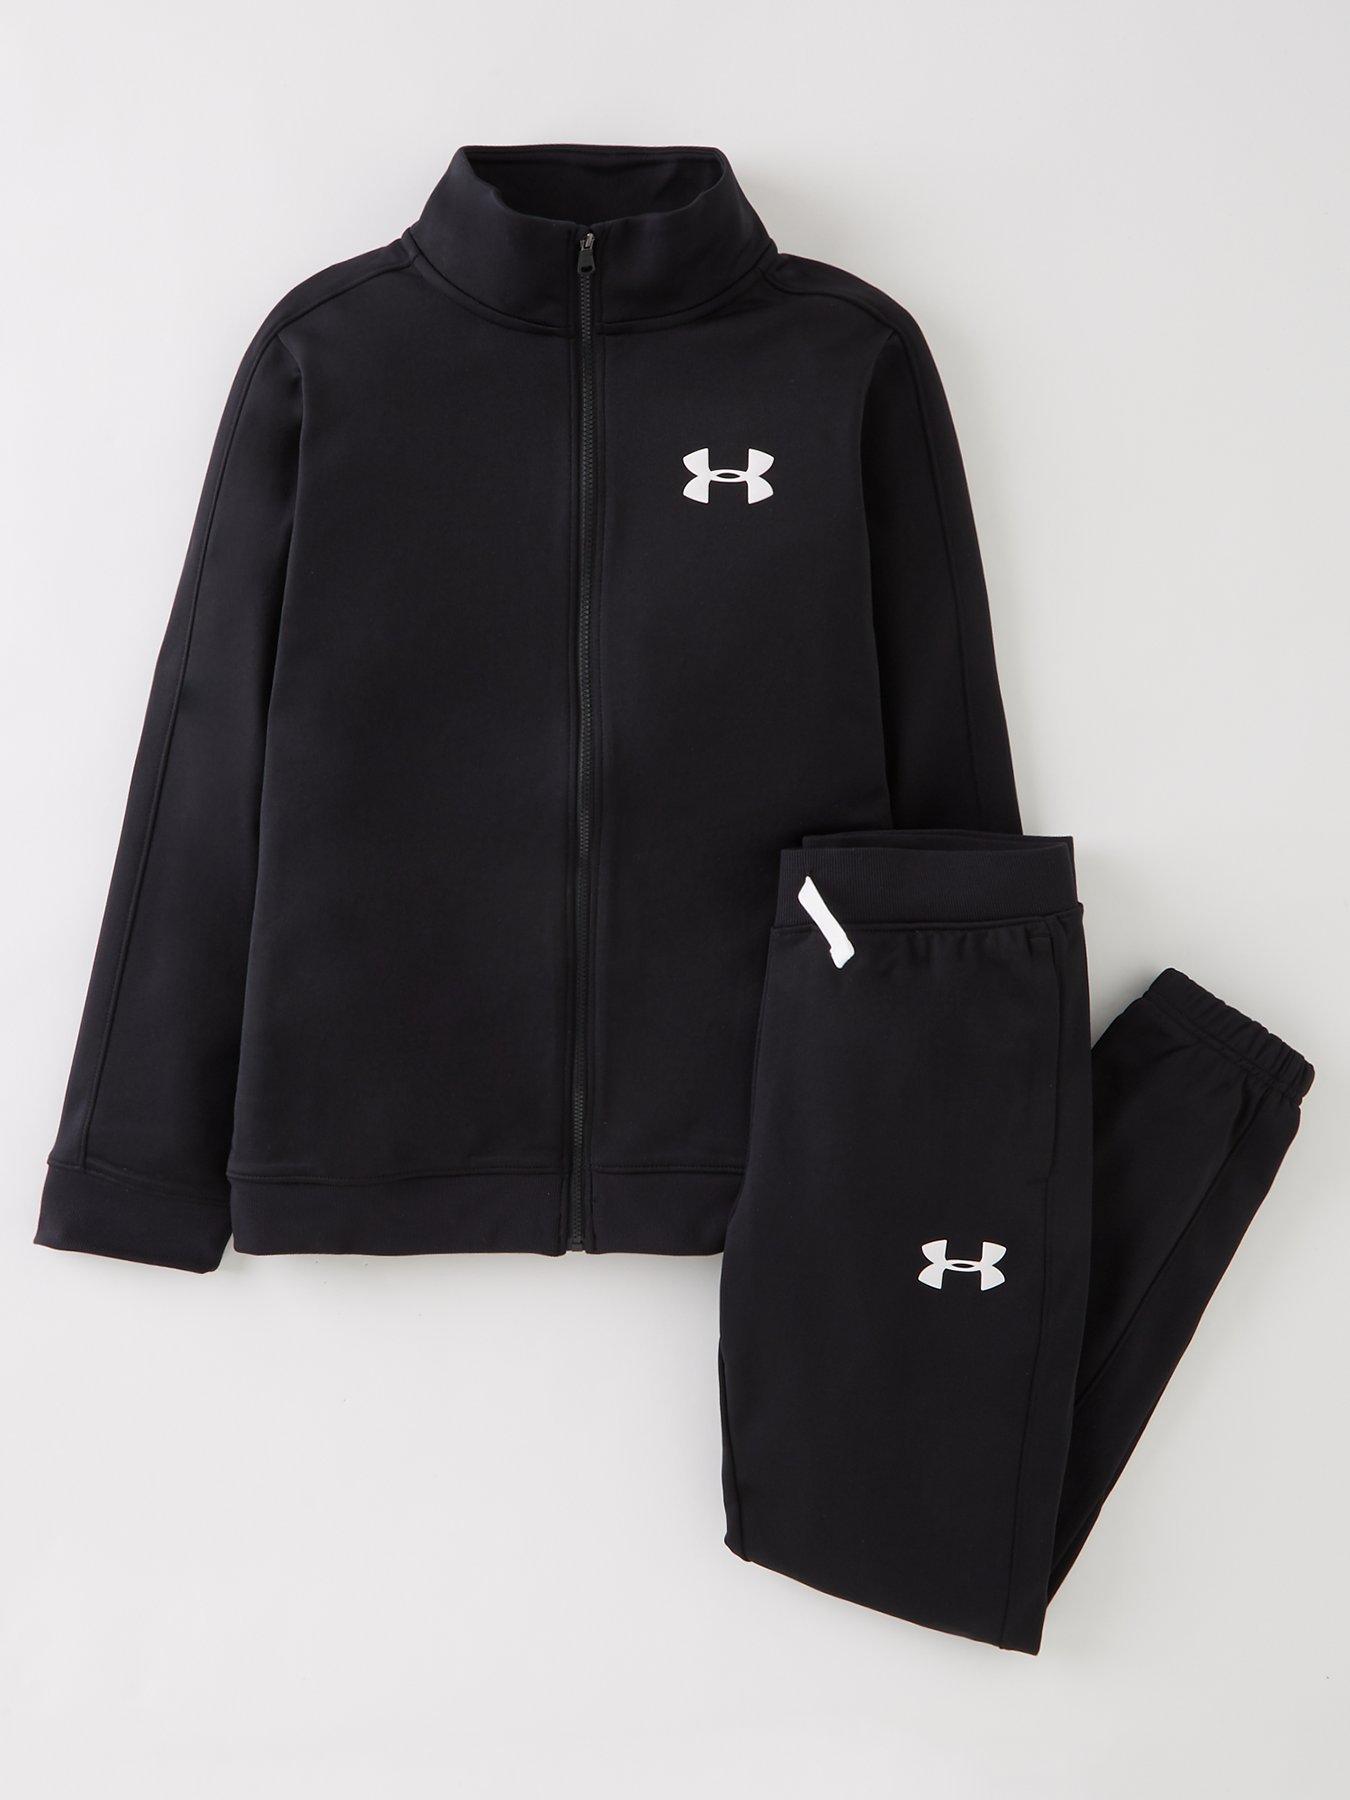 Under Armour, Armour Challenger Tracksuit Junior Boys, Tracksuits